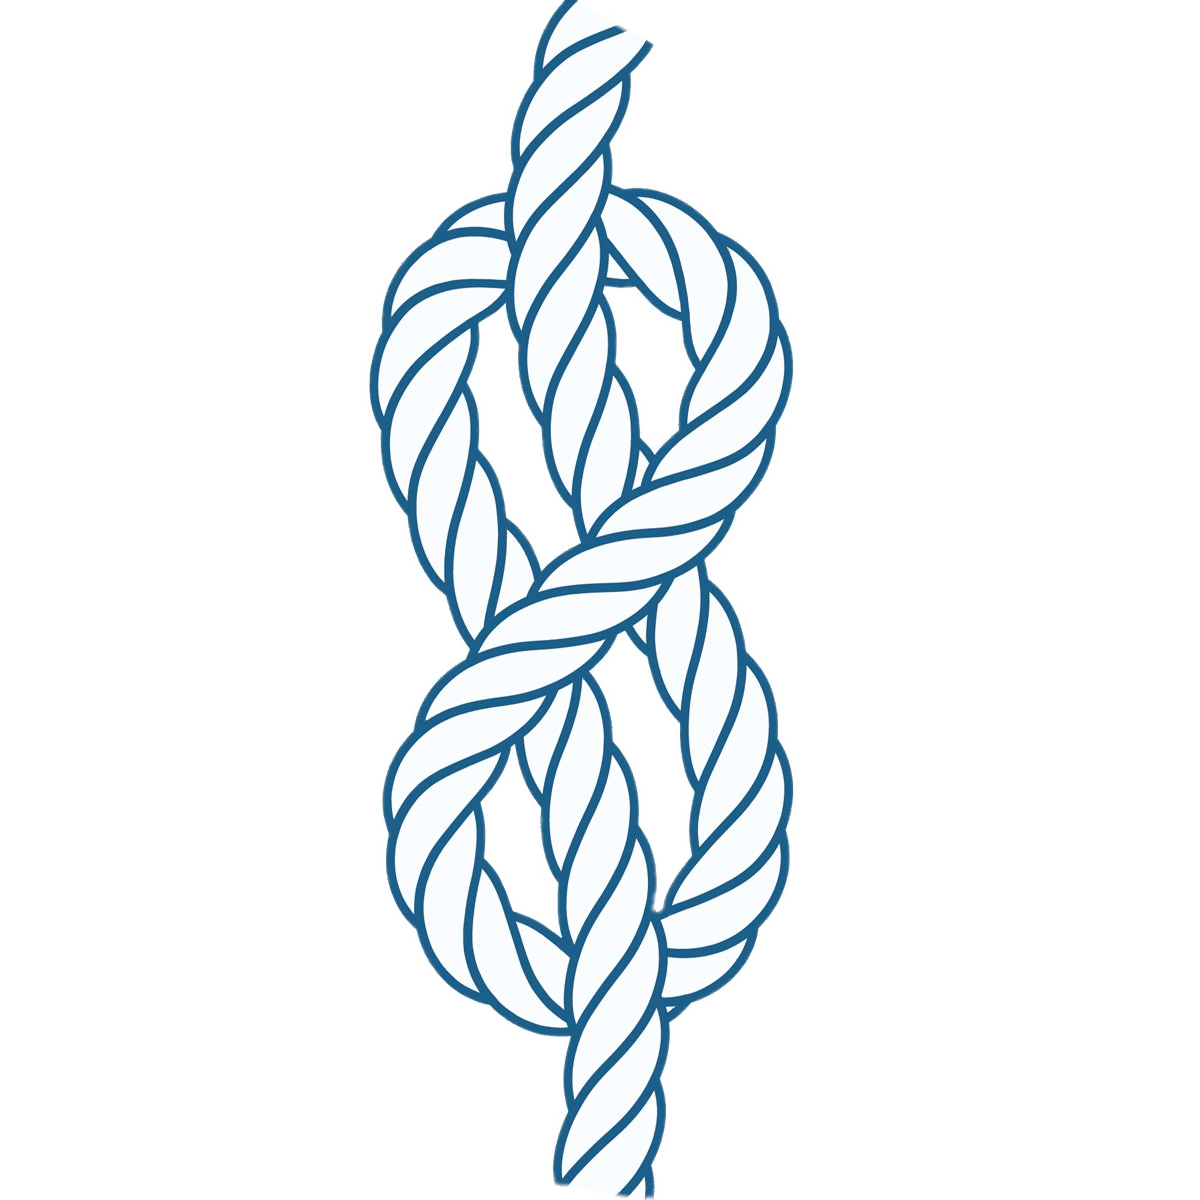 Knot clipart figure 8, Knot figure 8 Transparent FREE for download on ...